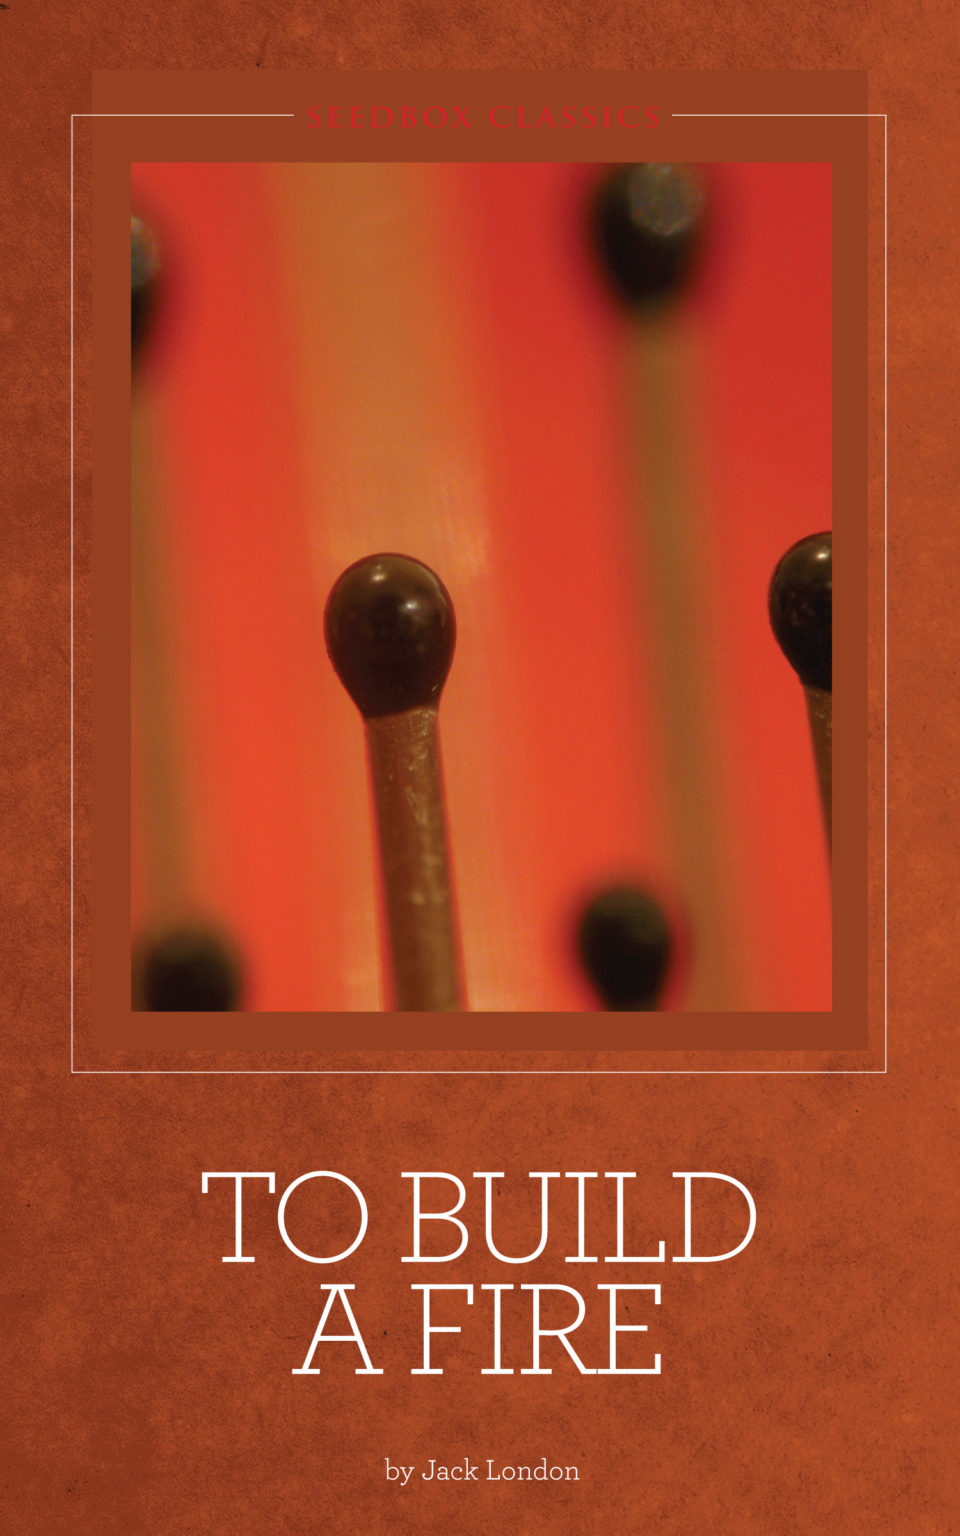 To Build a Fire and Other Stories by Jack London